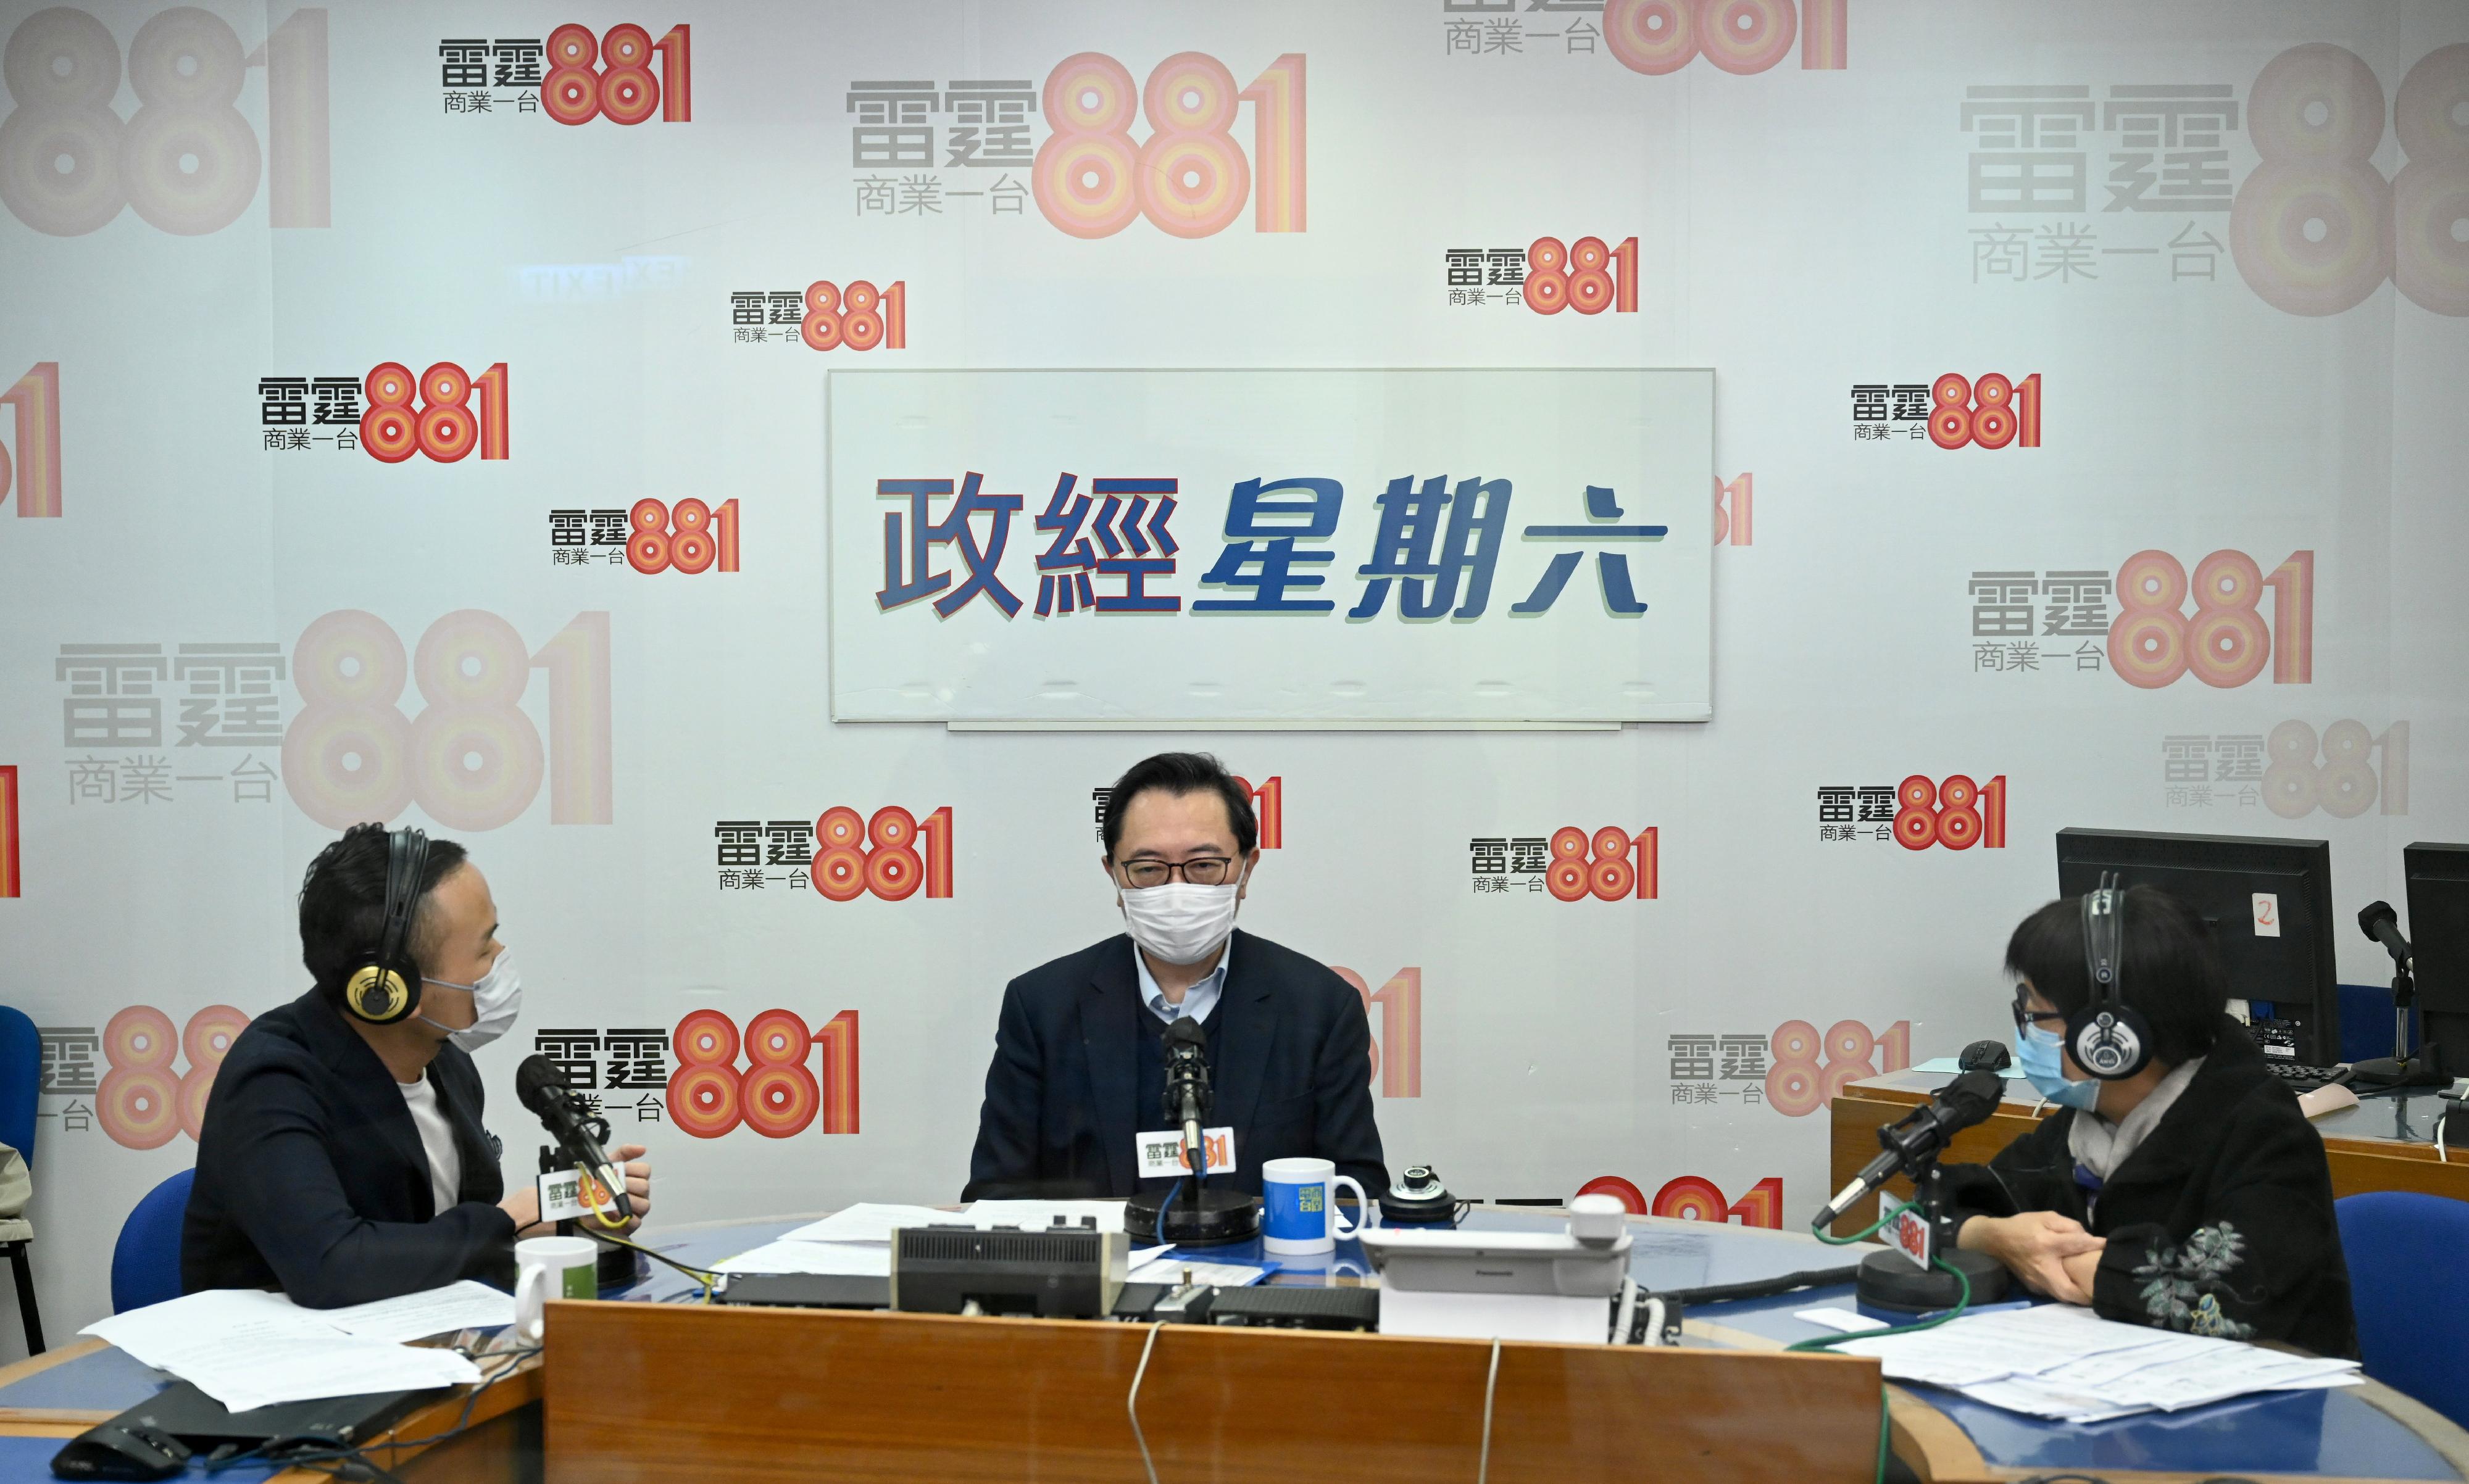 The Chairman of the Electoral Affairs Commission, Mr Justice Barnabas Fung Wah (centre), is interviewed by a radio programme this morning (December 18) on the electoral arrangements including the Electronic Poll Register system and special queues, as well as calling on electors to vote tomorrow (December 19). 